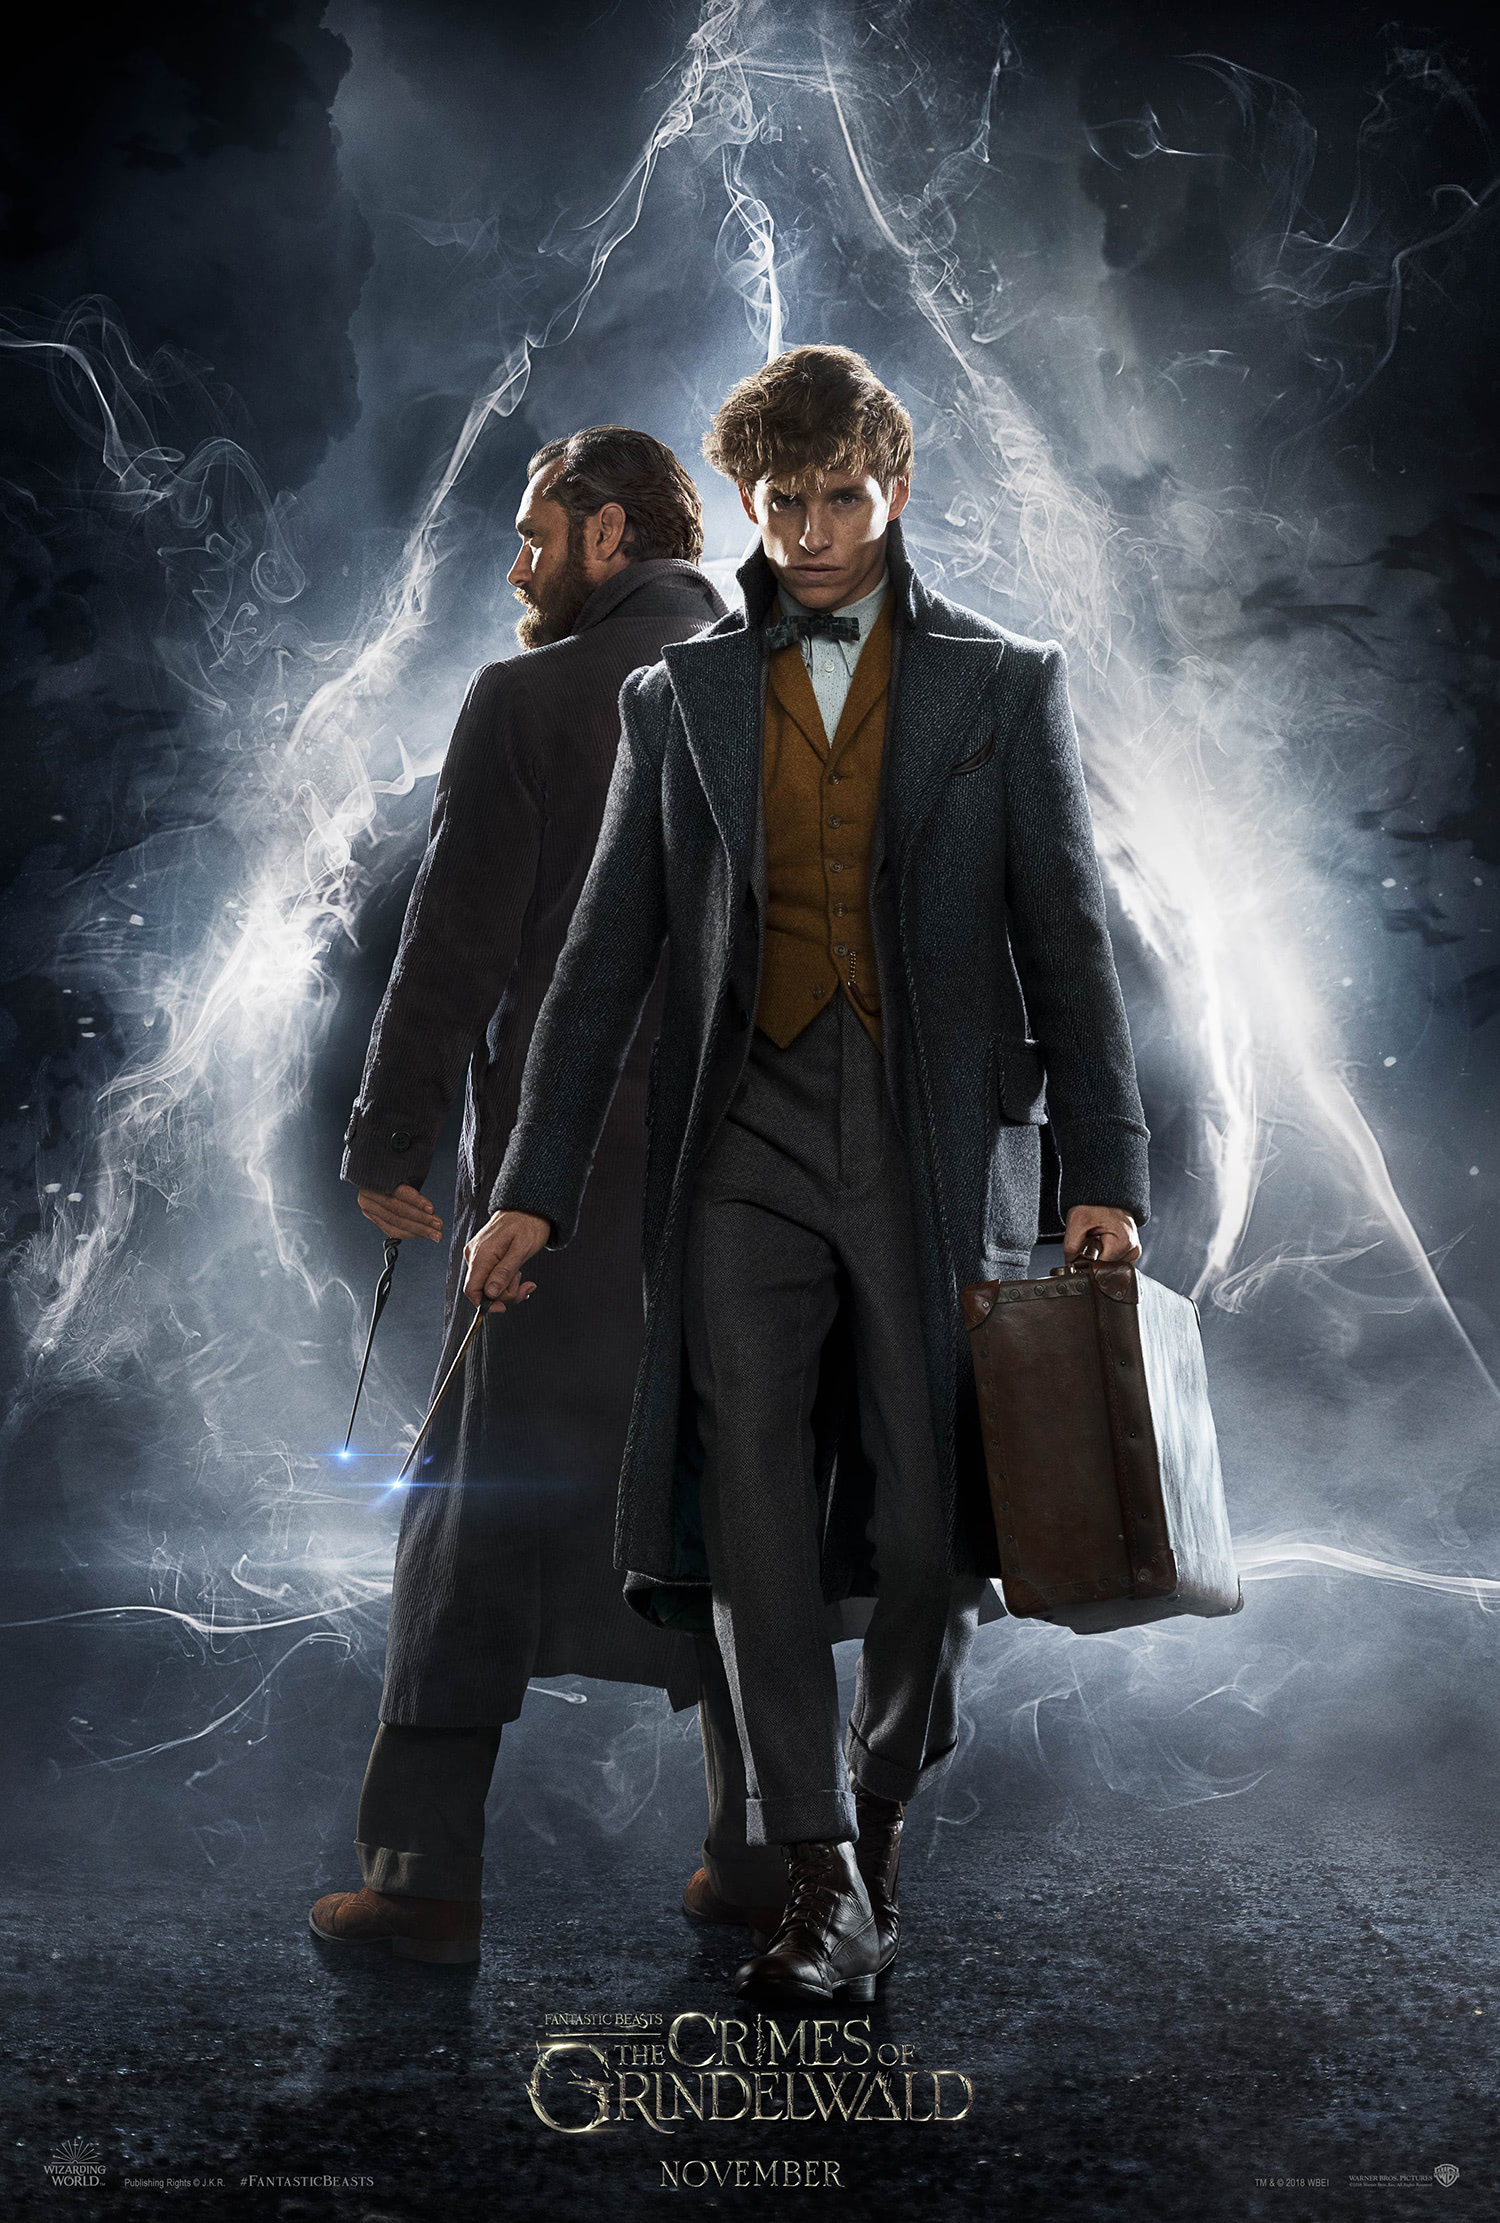 The first 'Fantastic Beasts: Crimes of Grindelwald' poster has been released.